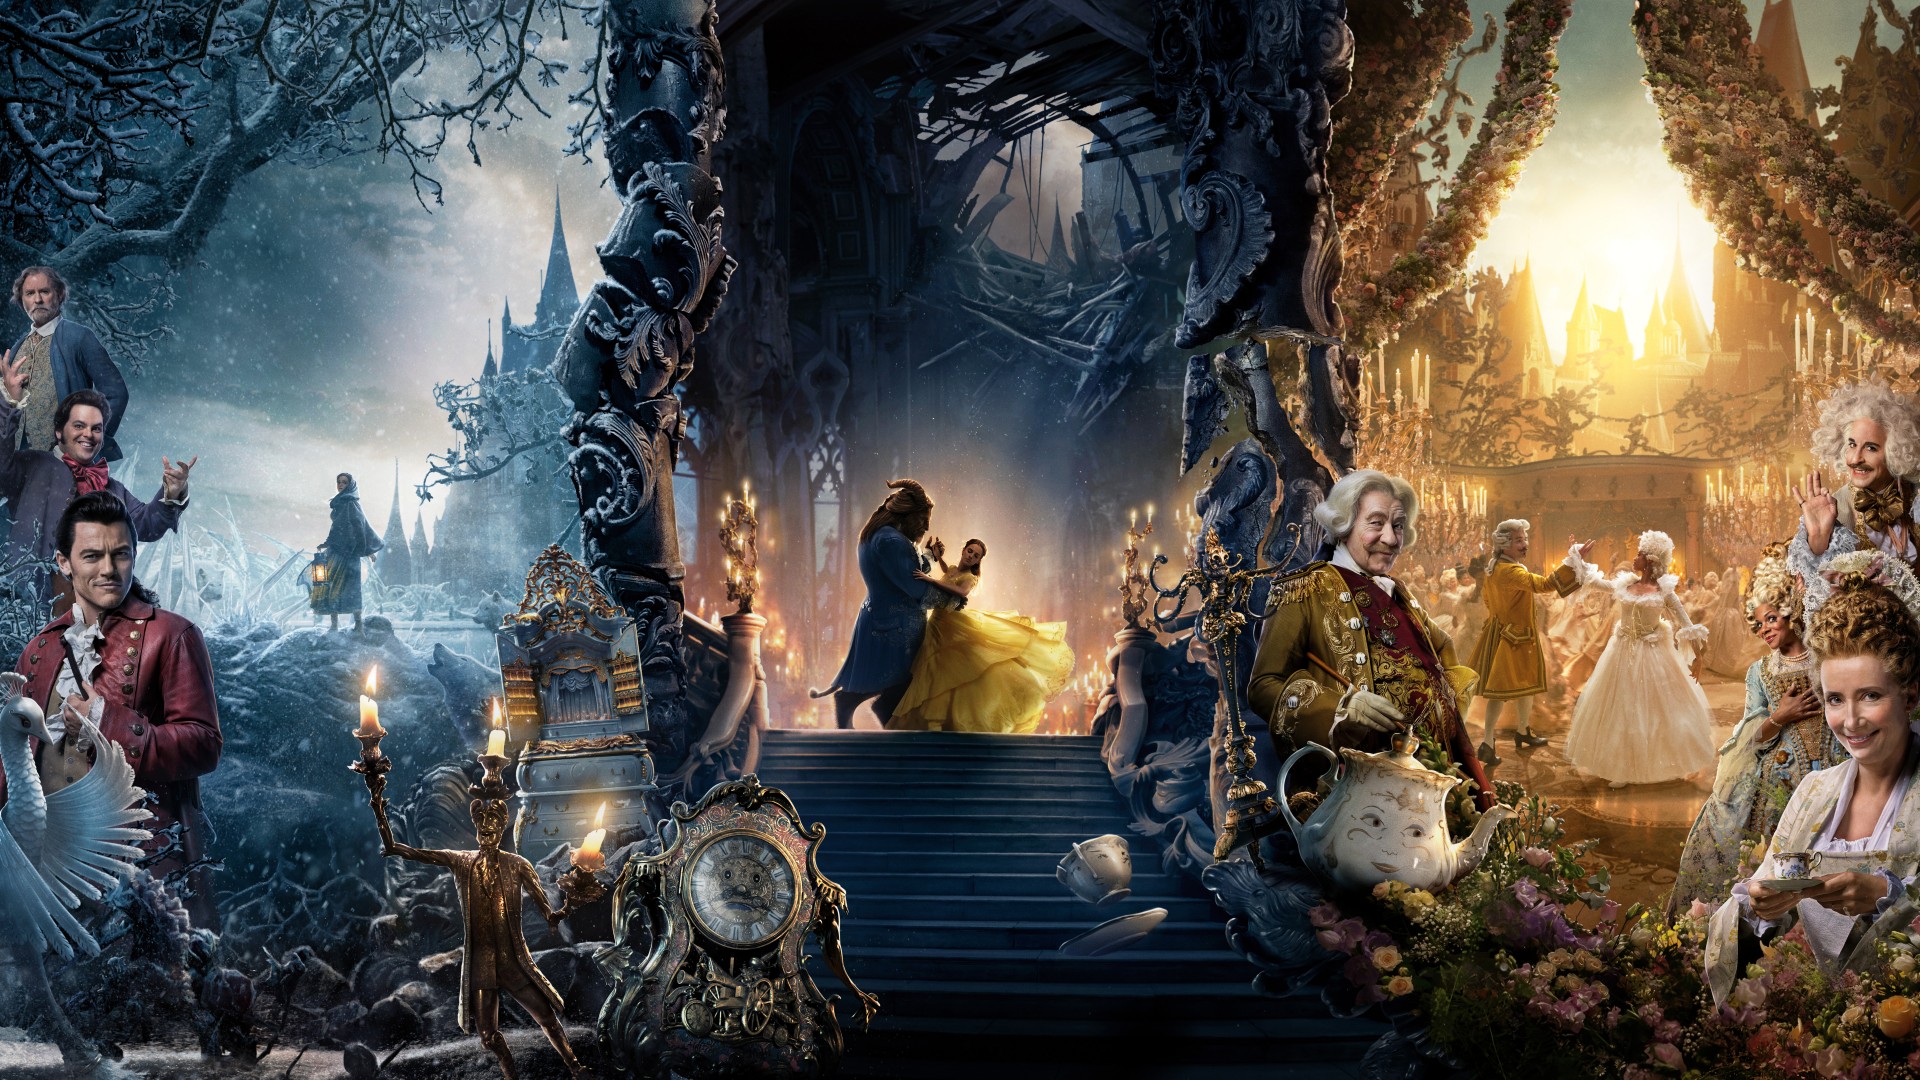 Ultra Hd Wallpapers 8k Resolution And 4k Resolution Beauty And The Beast 1920x1080 Wallpaper Teahub Io Tons of awesome 7680x4320 wallpapers to download for free. ultra hd wallpapers 8k resolution and